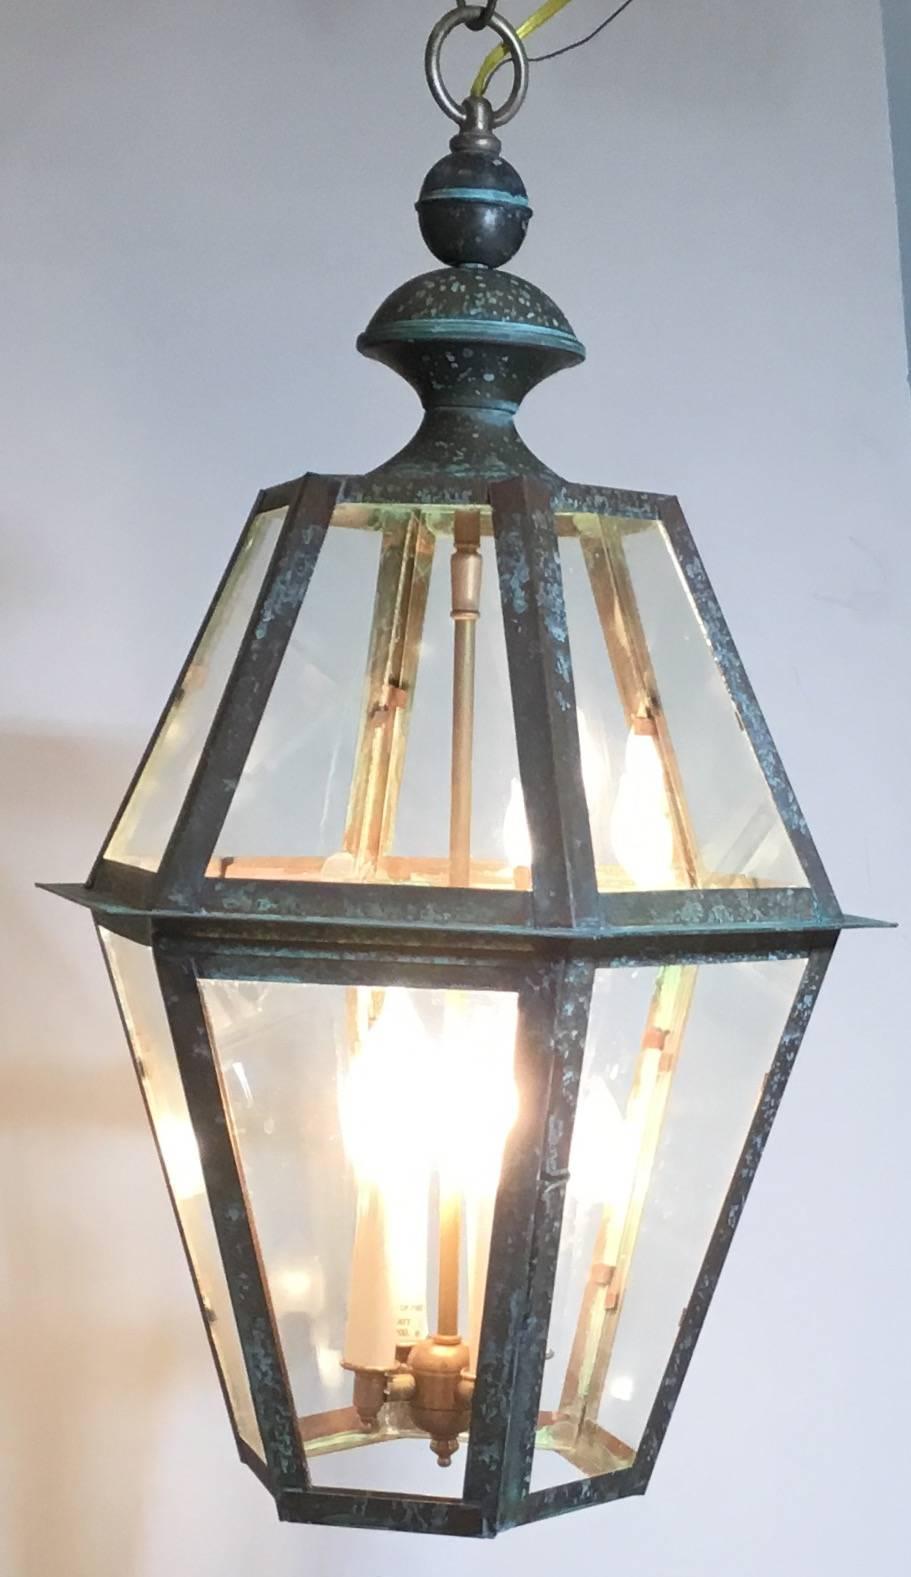 Architectural hanging copper lantern made of copper, with four 60/watt lights
Electrified and ready to light, great indoor or outdoor.
Up to US code, UL approved.
Copper canopy included.